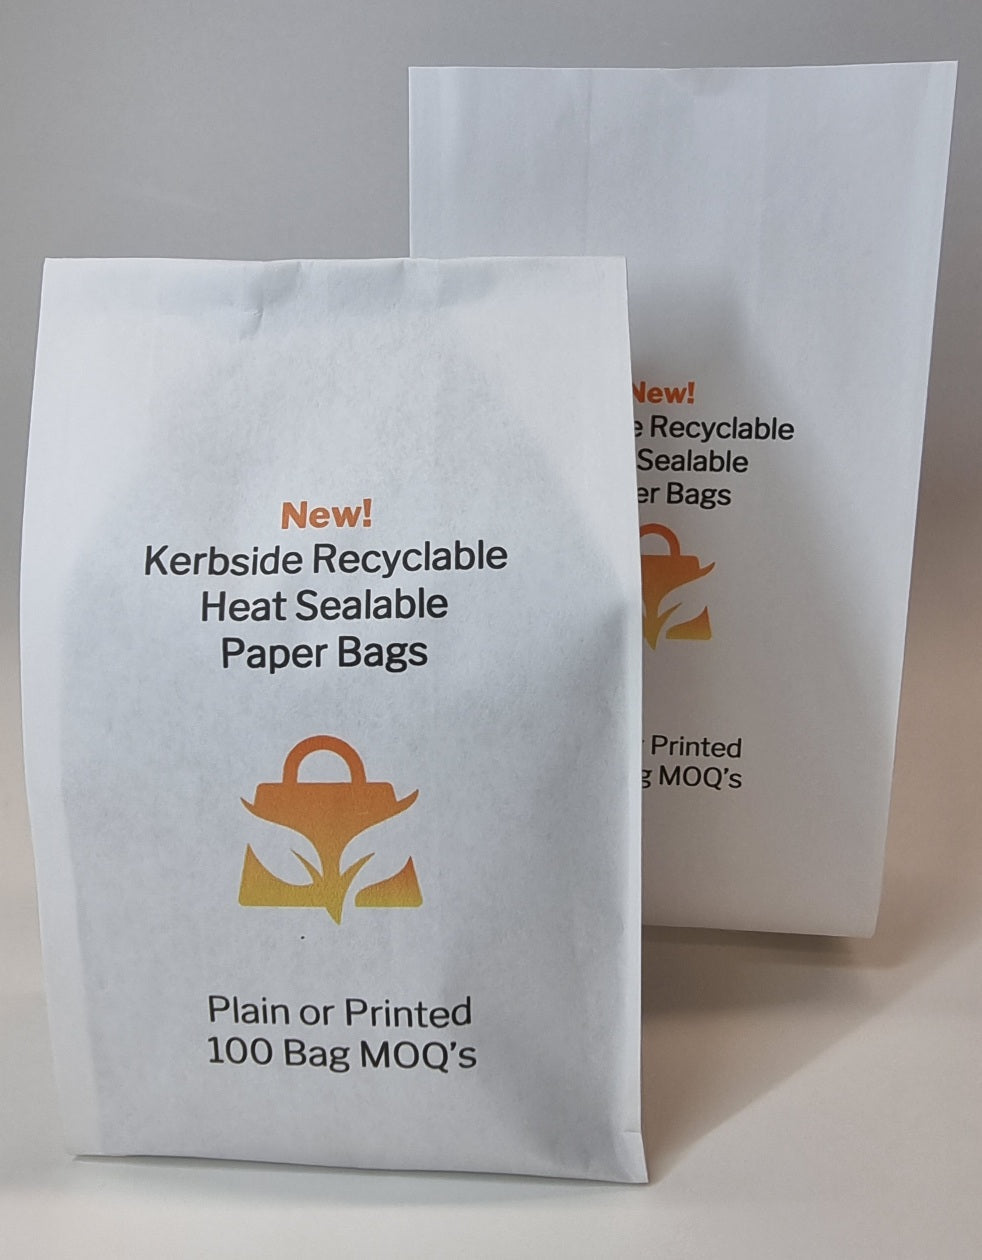 Custom Print EmberPack™ Dry Goods 500g Recyclable Paper Bag: Sample Pack Packing Materials EmberPack by EAM 